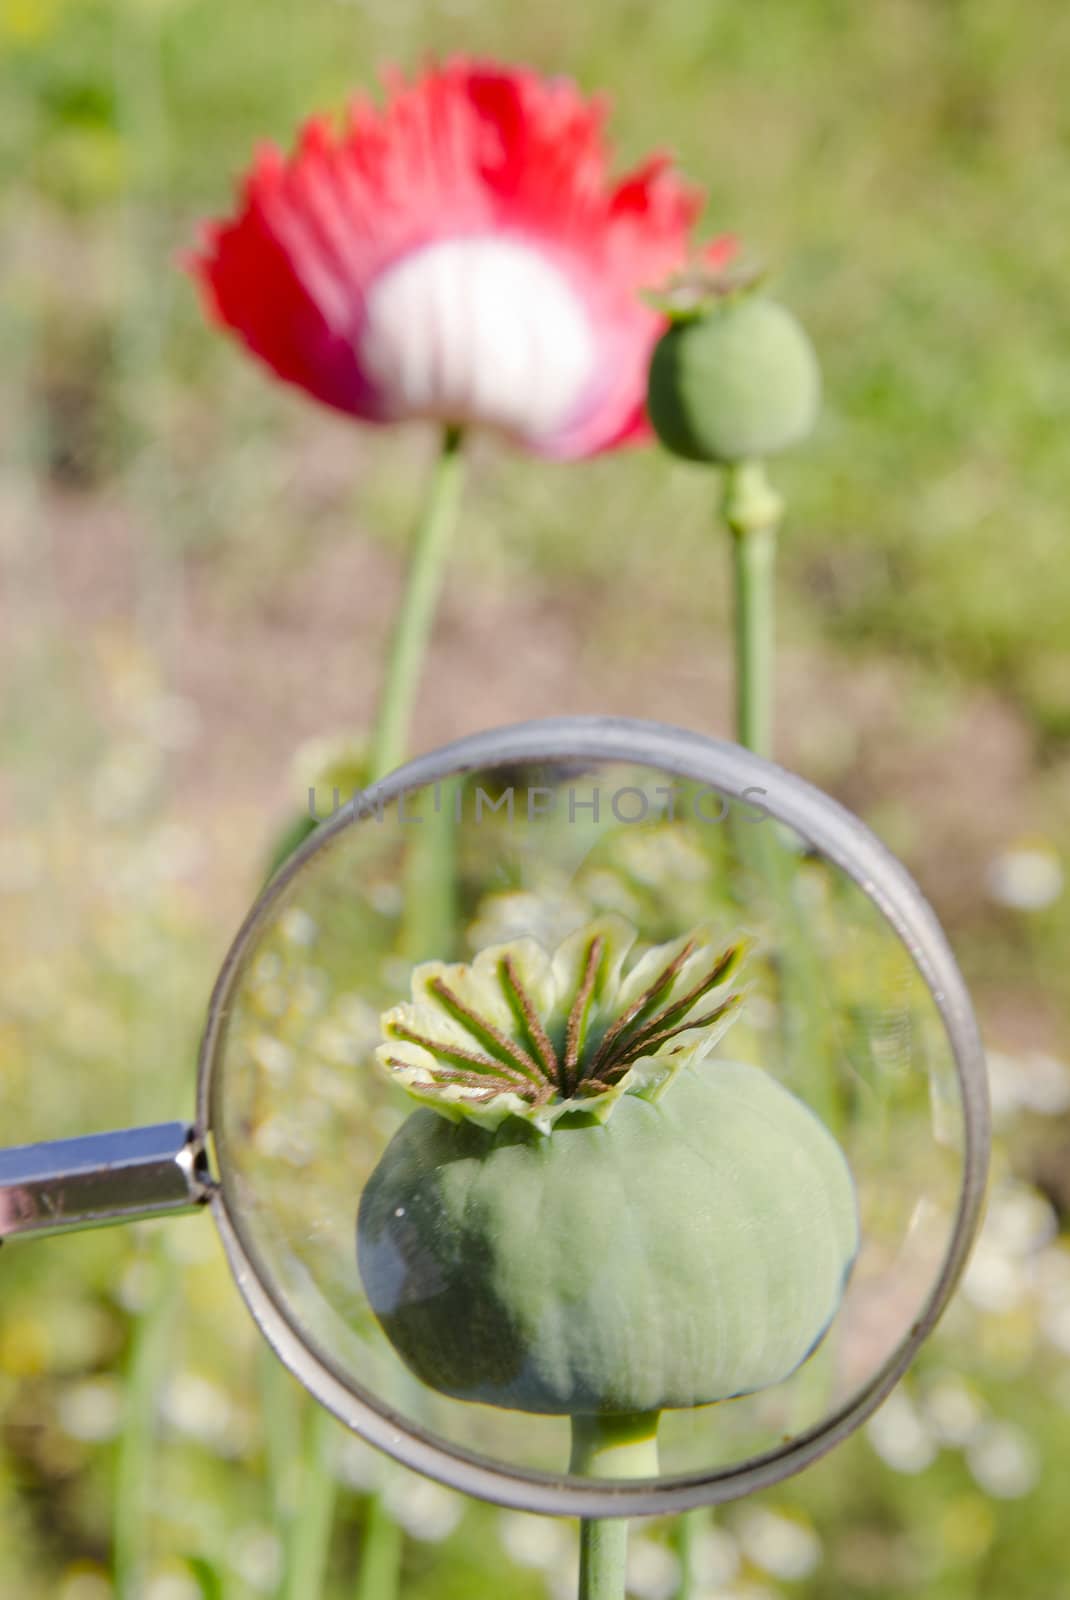 Poppy head through a magnifying glass. Flower details.